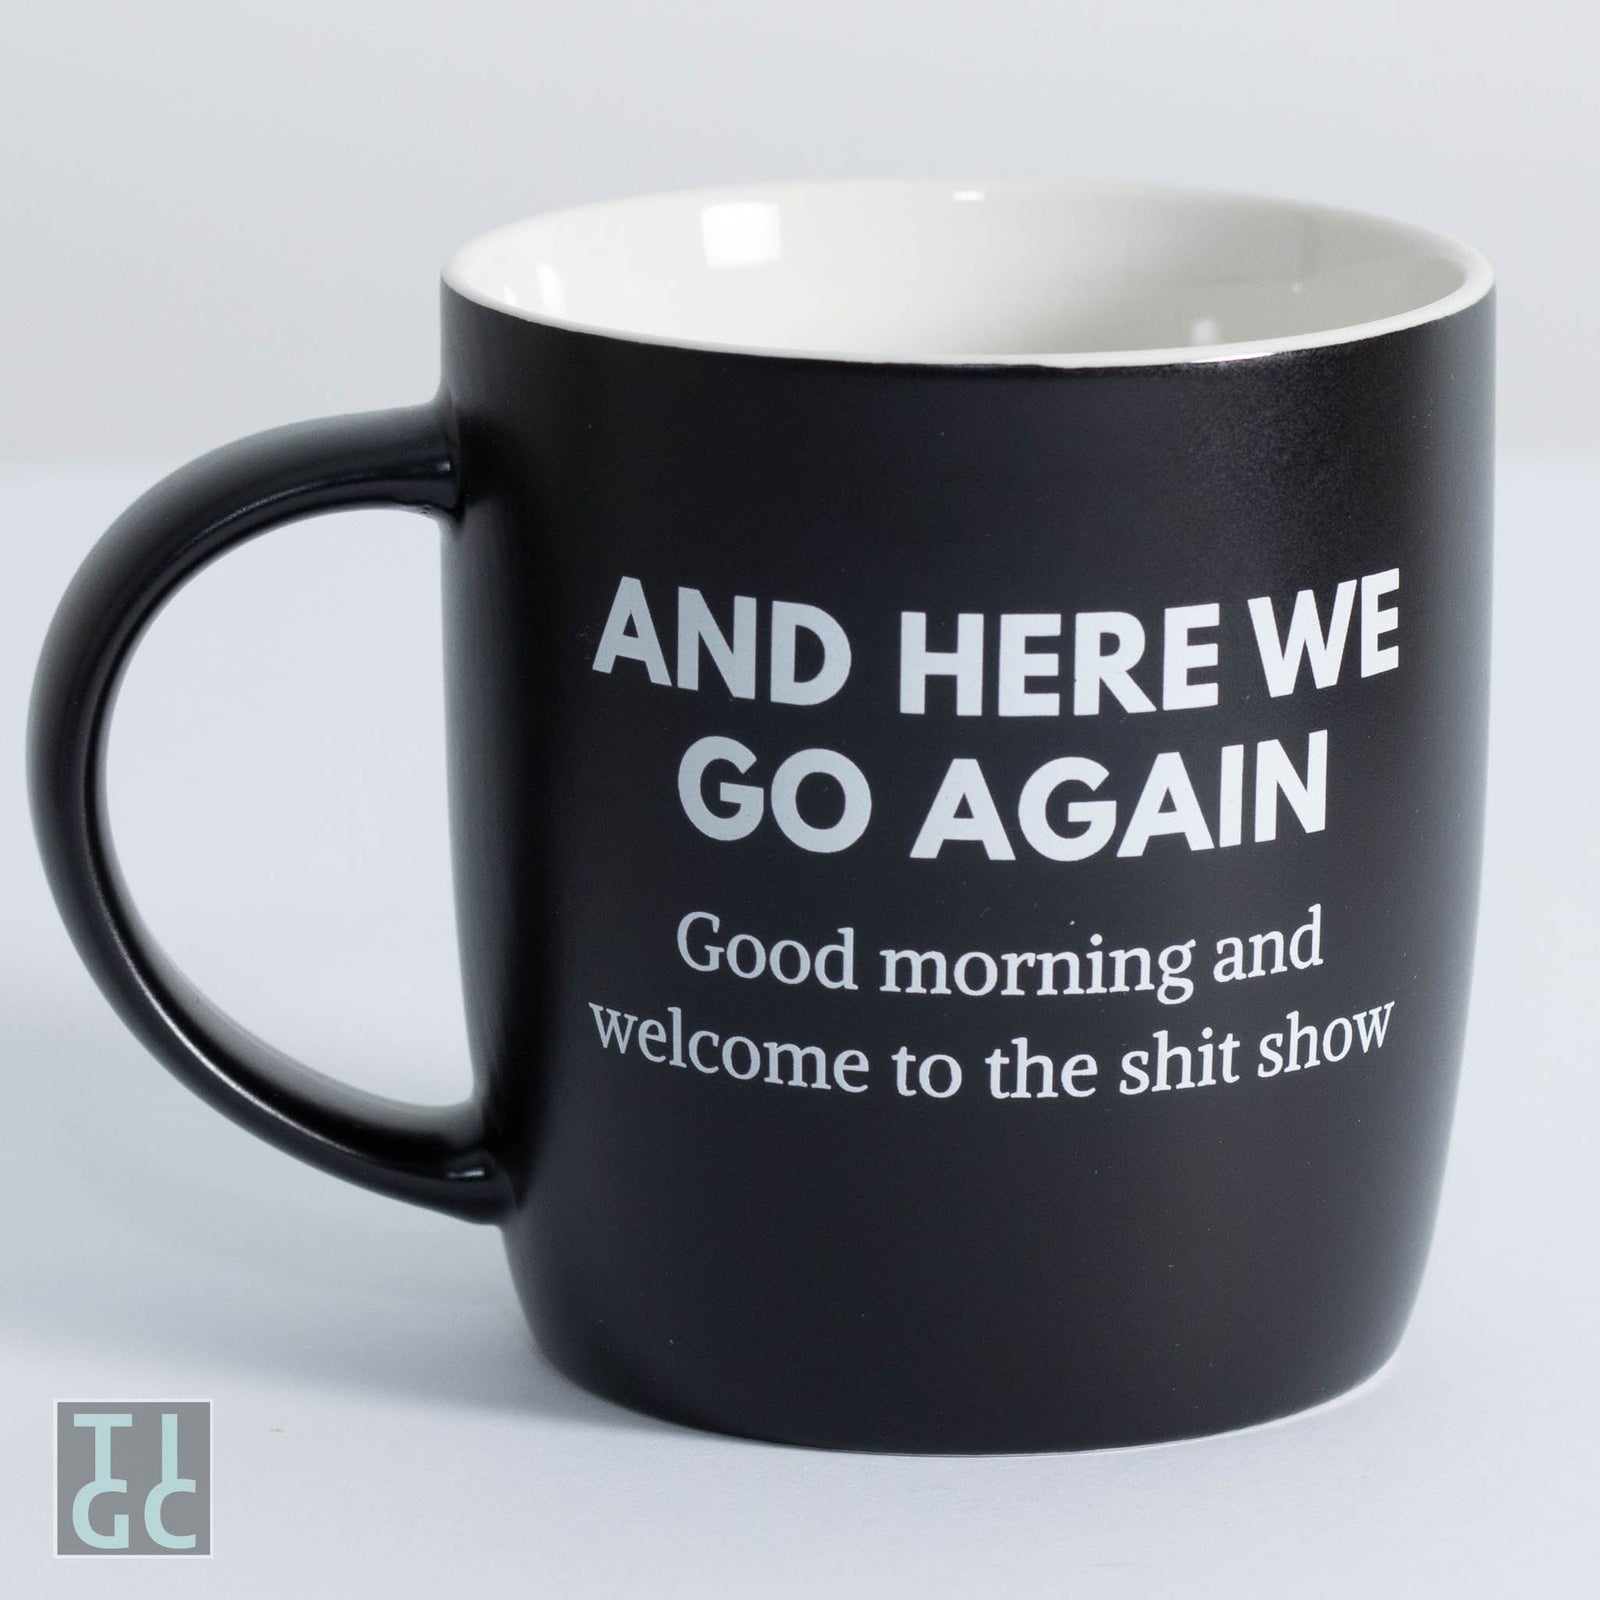 https://theinappropriategiftco.com/cdn/shop/files/tigc-the-inappropriate-gift-co-and-here-we-go-again-mug-30906486587434_1600x.jpg?v=1702013980